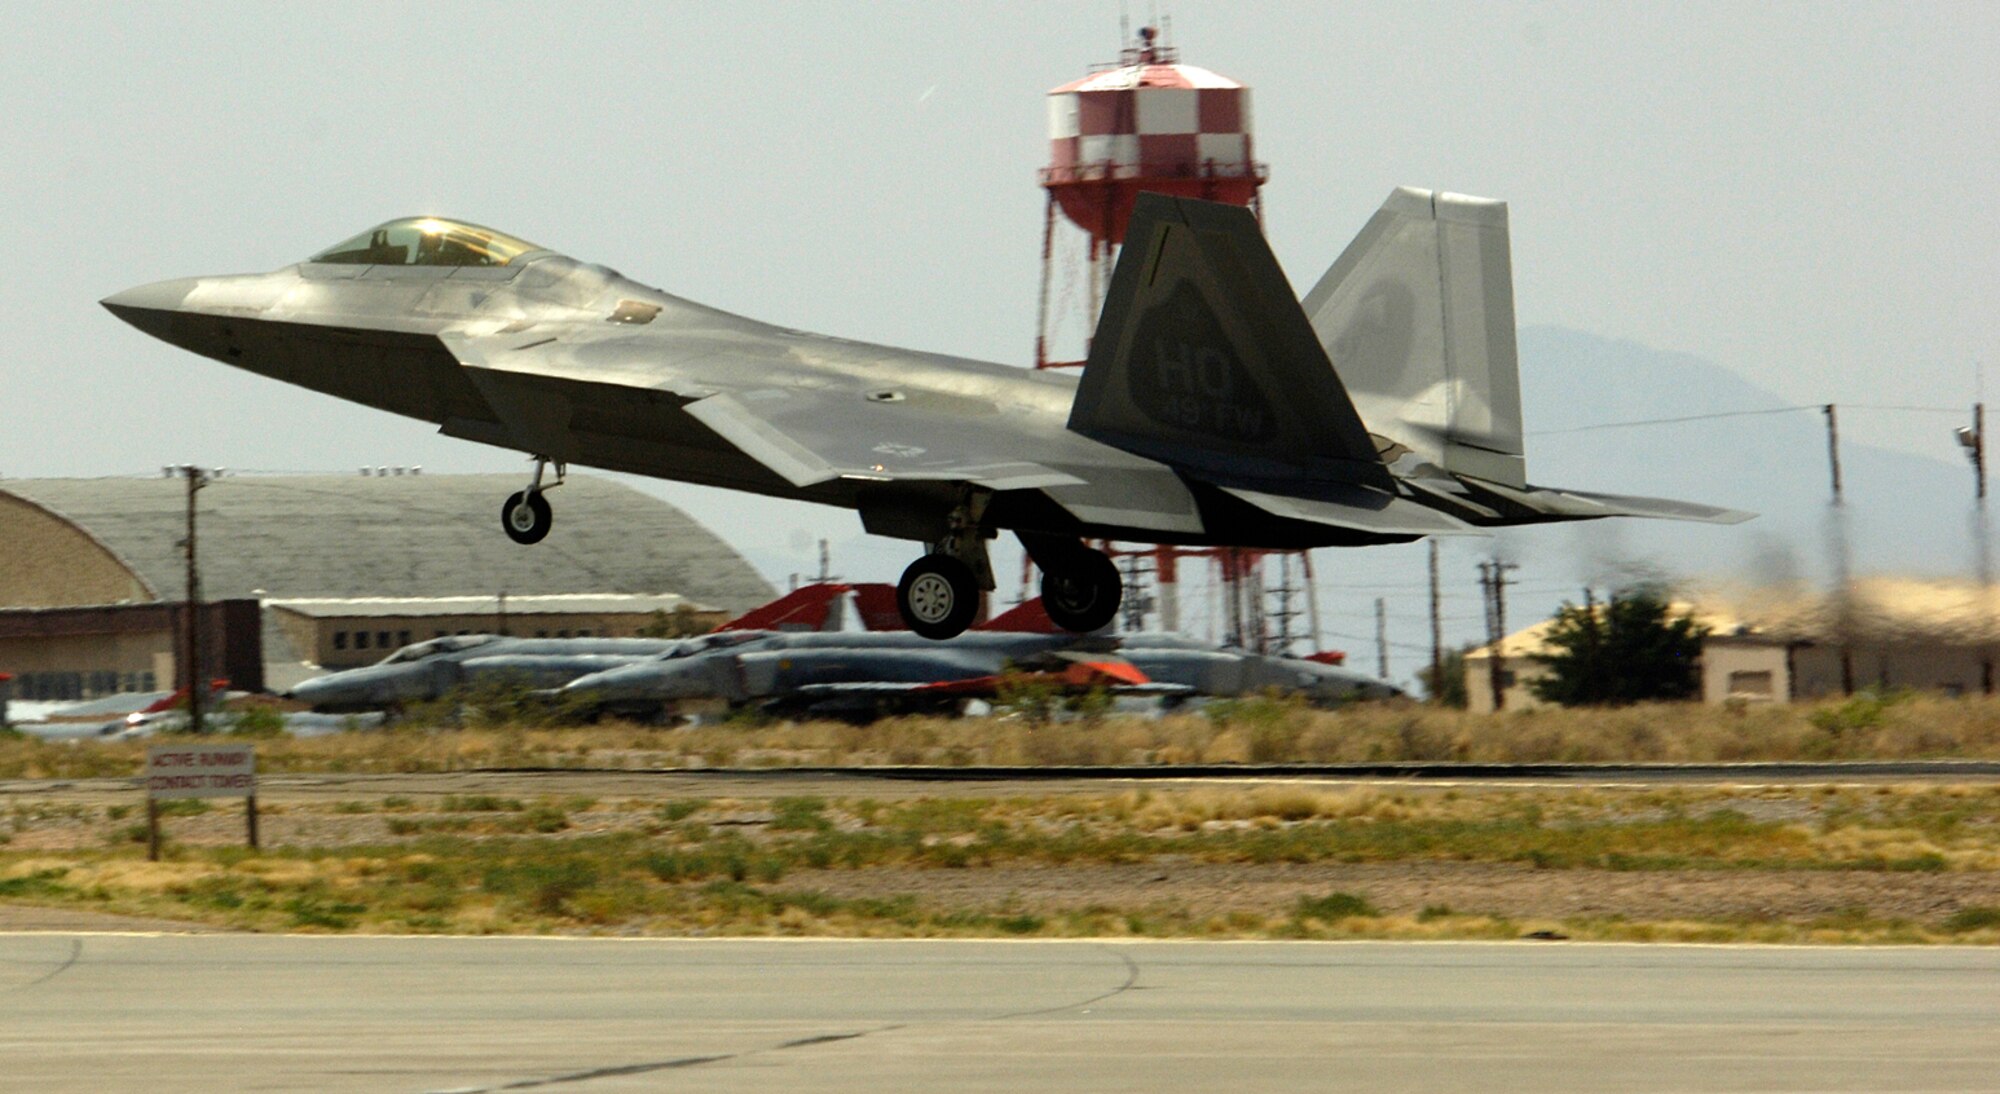 One of two F-22A Raptors lands at Holloman Air Force Base, N.M., June 2. The jets are the first two Holloman-tailed F-22s to arrive on base. Prior to landing, the jets flew over the Tularosa Basin, allowing the local community a chance to witness the future of Holloman. (U.S. Air Force photo/Airman 1st Class Michael Means)